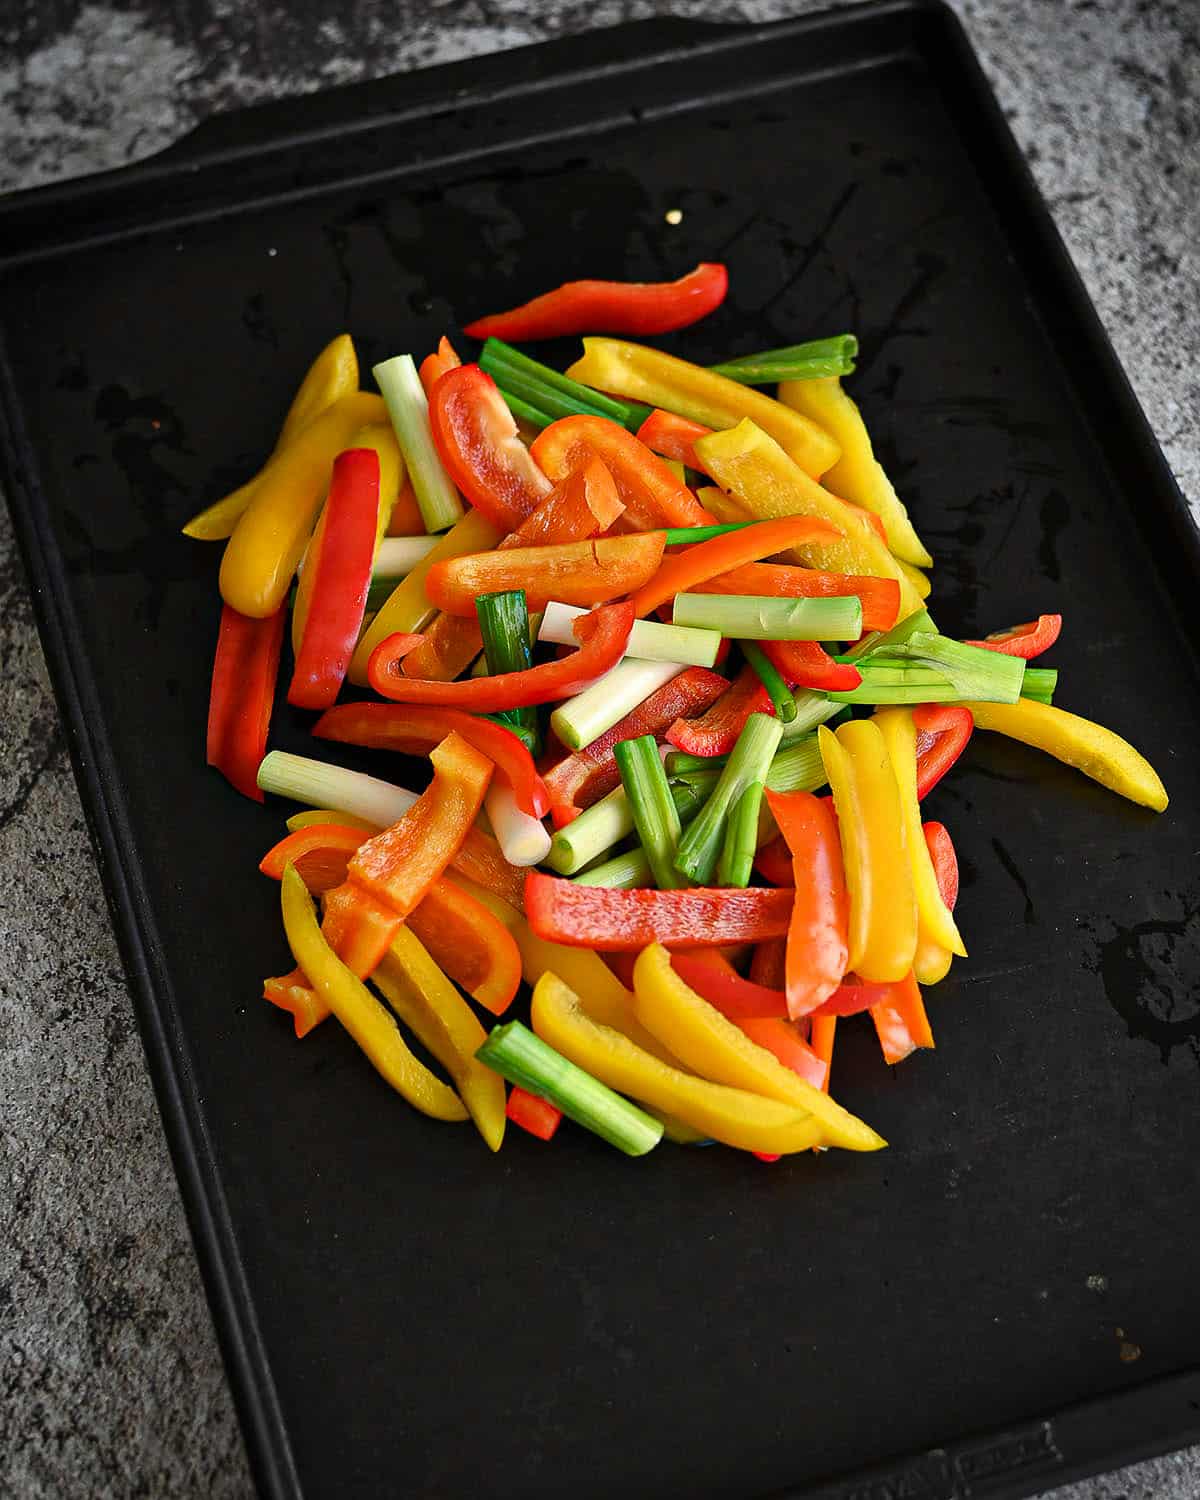 Sliced colorful peppers and green onions on a black baking sheet.